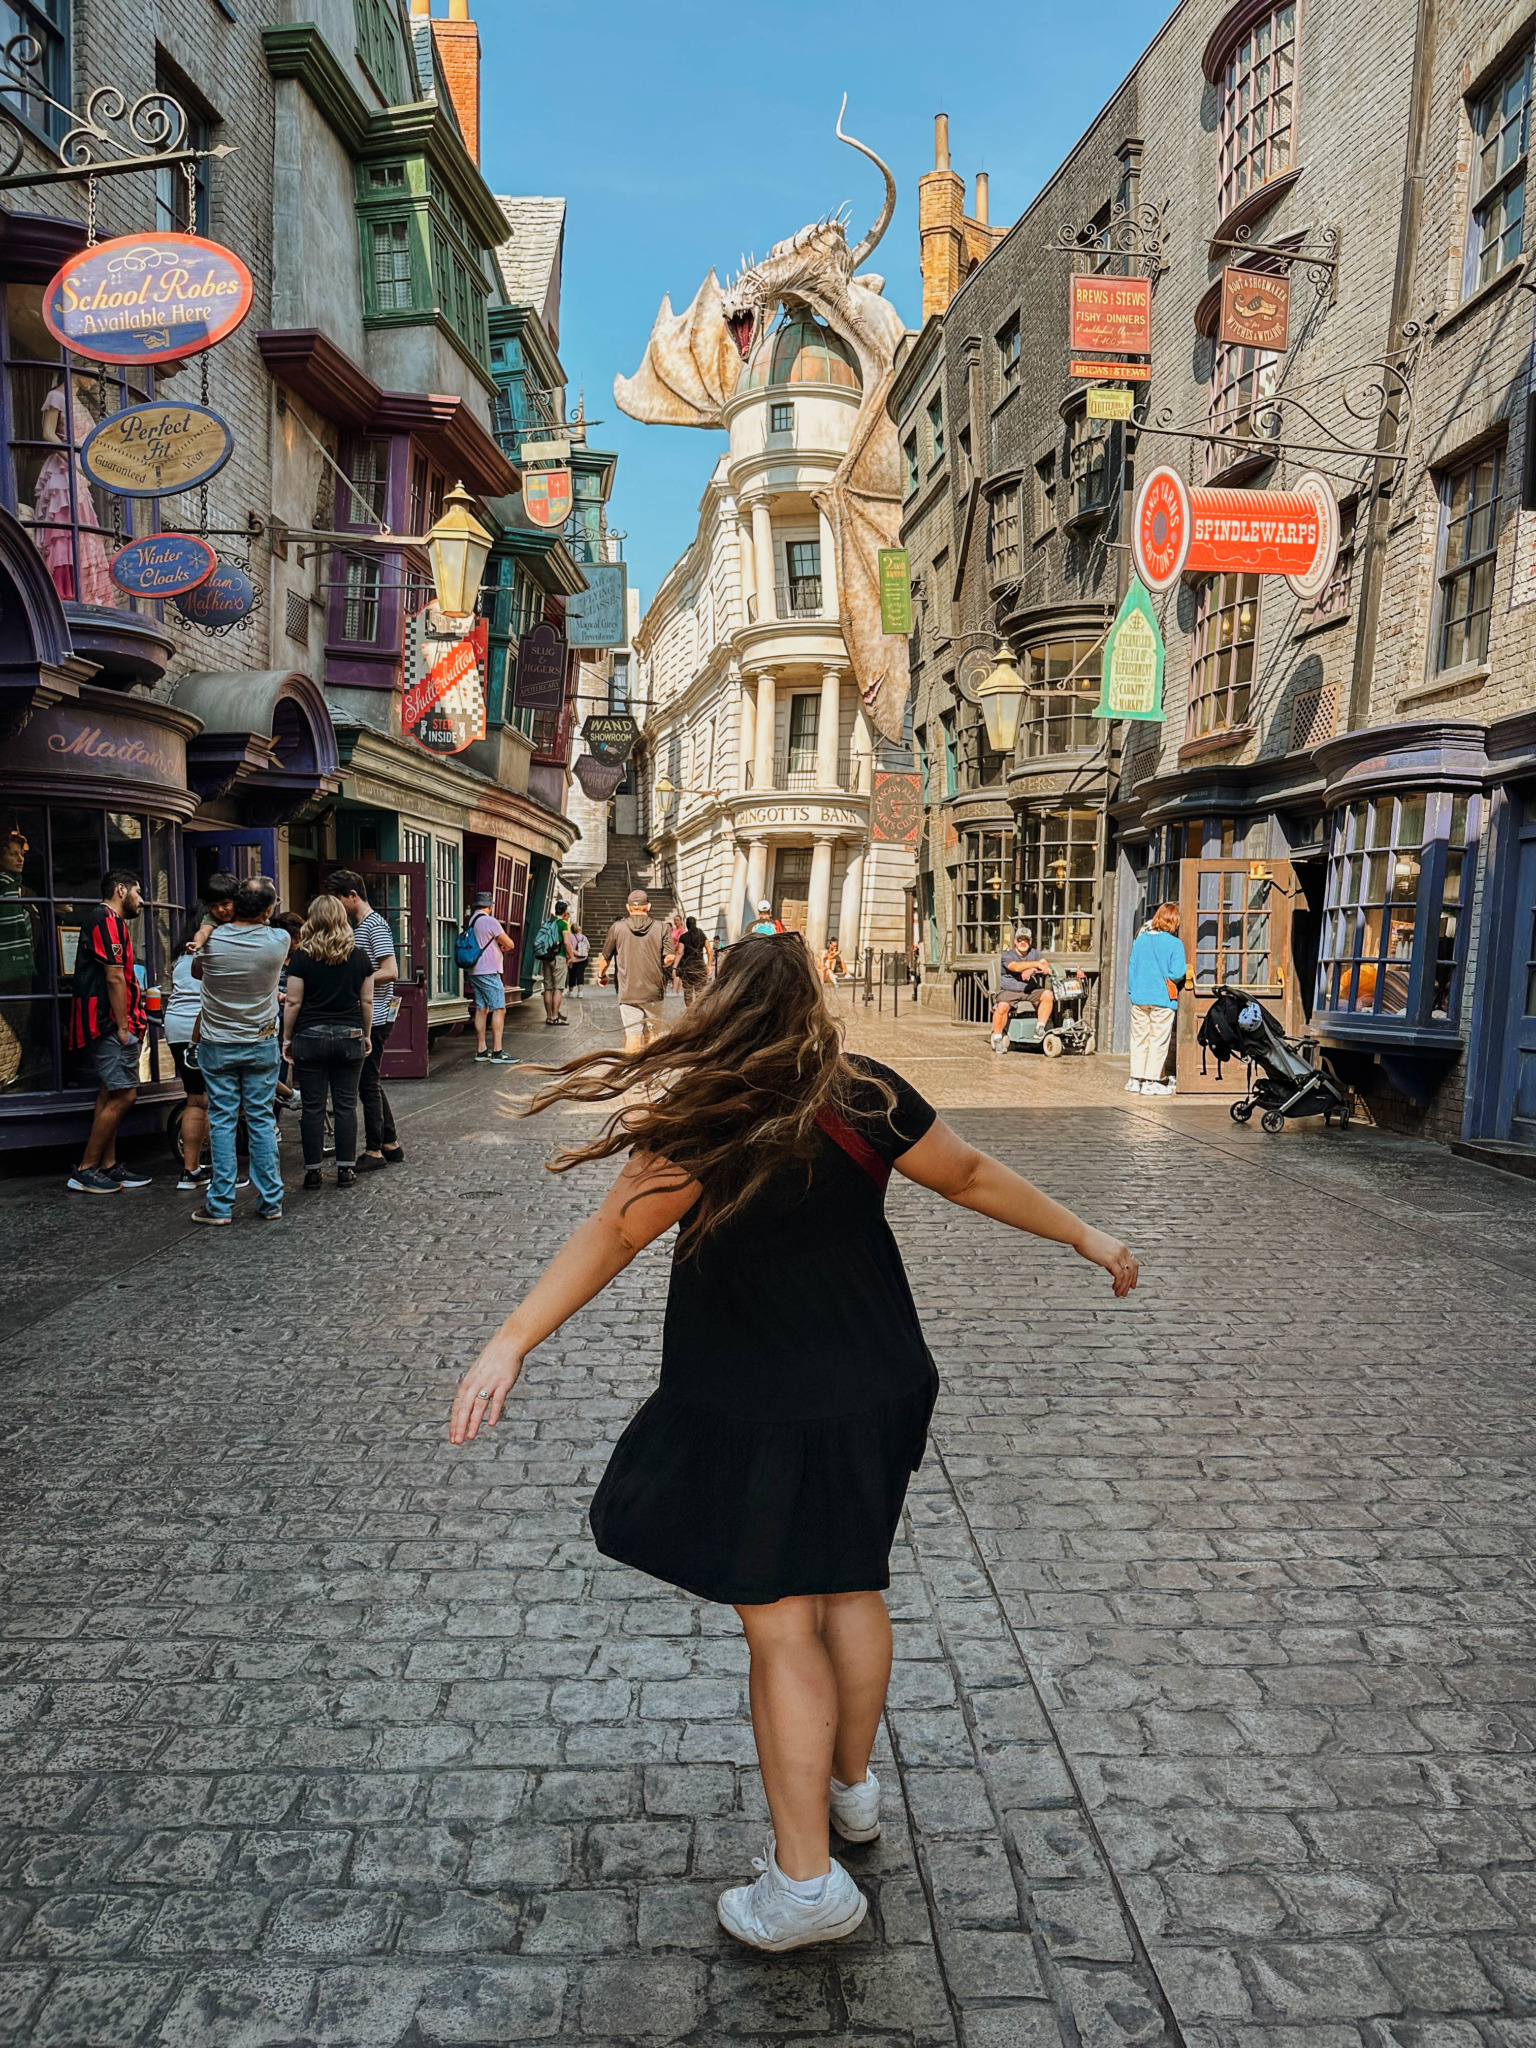 Wizarding World of Harry Potter - What To Know BEFORE You Go